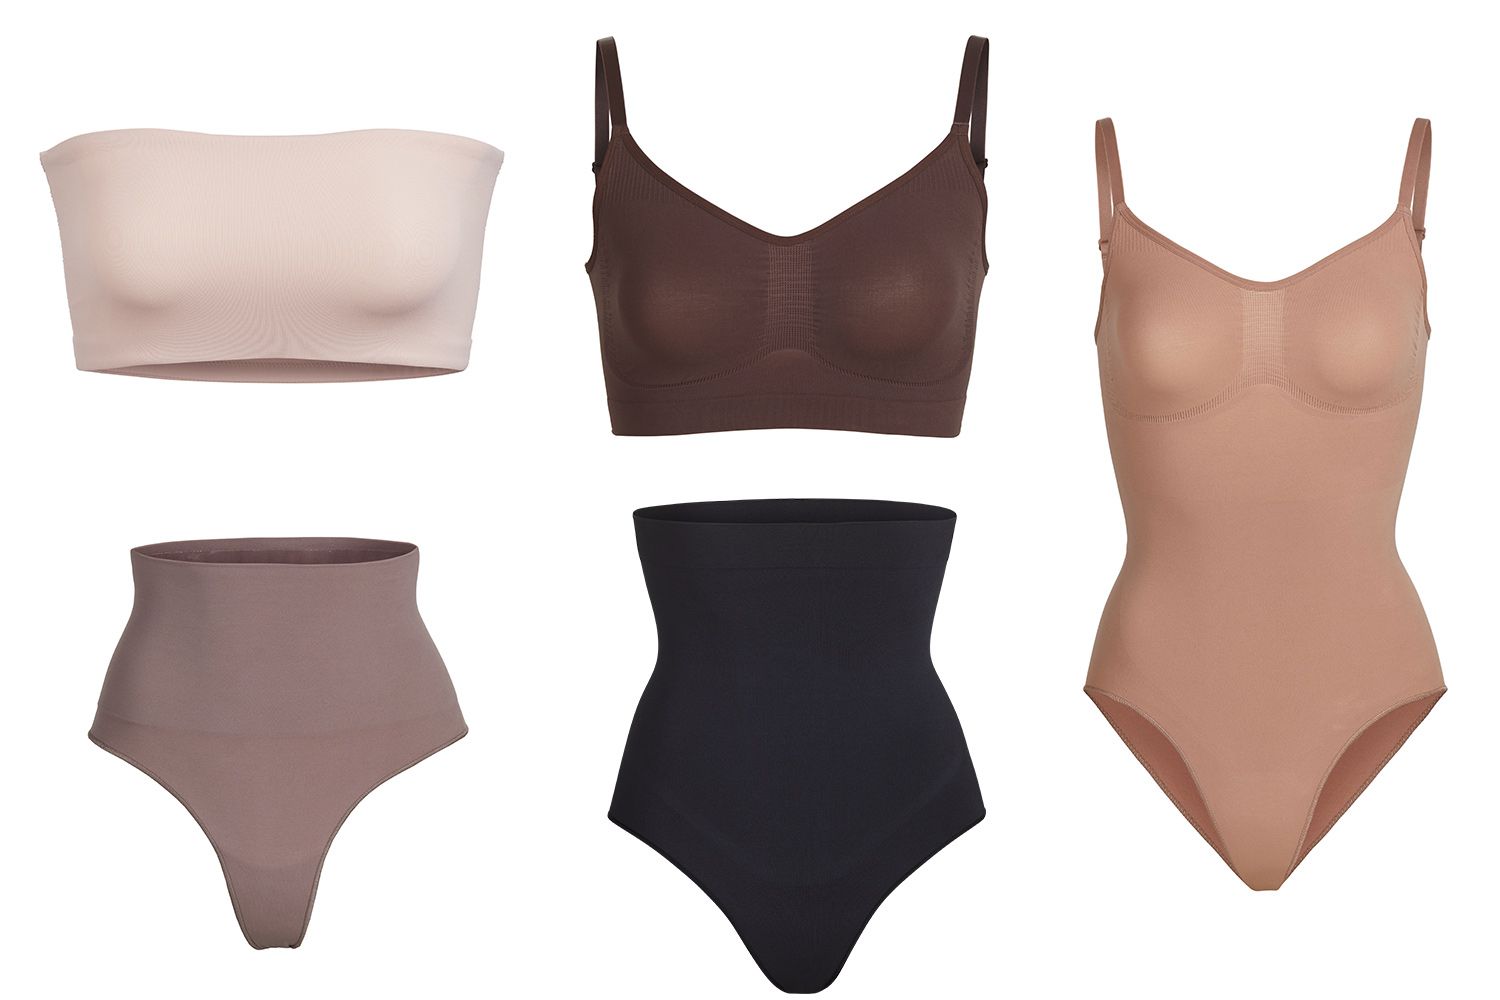 Kim Kardashian's Shapewear Line, SKIMS, Is Here! What to Know About Her 